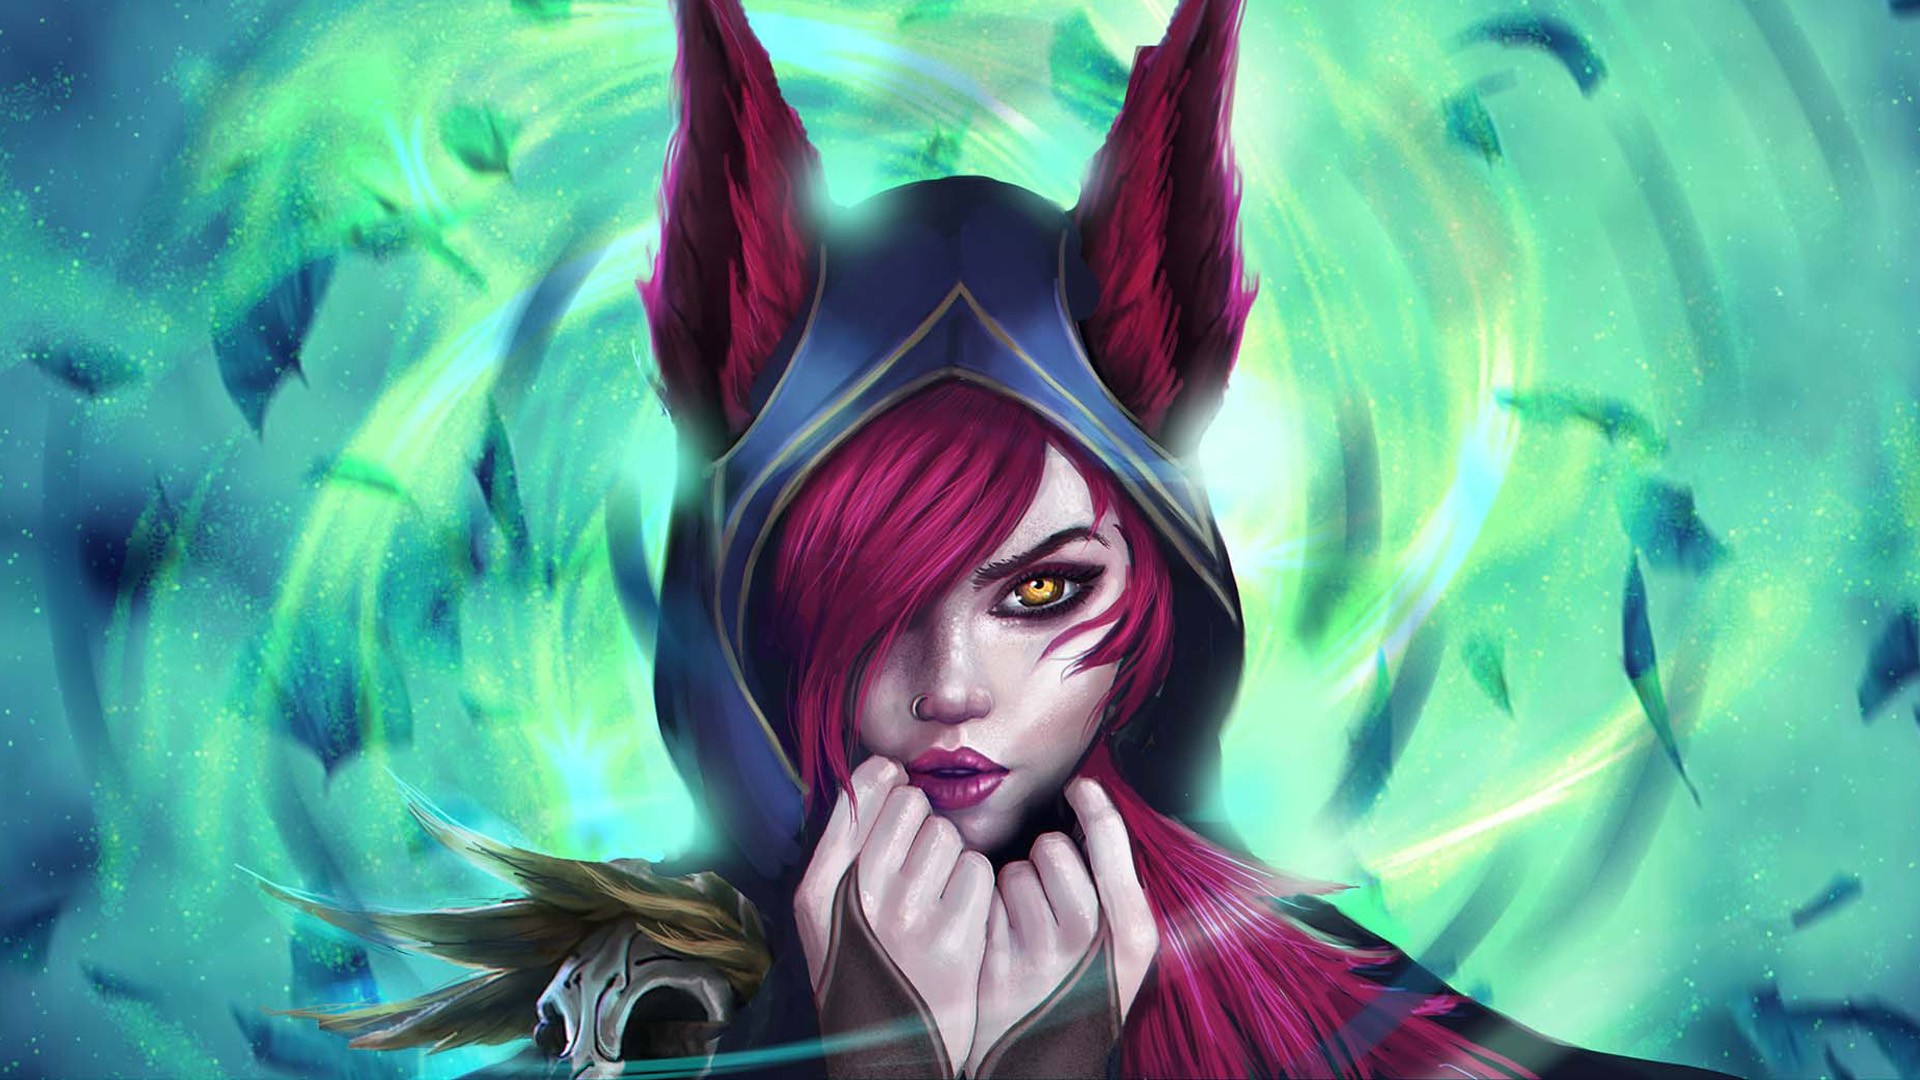 General 1920x1080 League of Legends Xayah (League of Legends) fantasy girl anime girls yellow eyes redhead PC gaming turquoise green